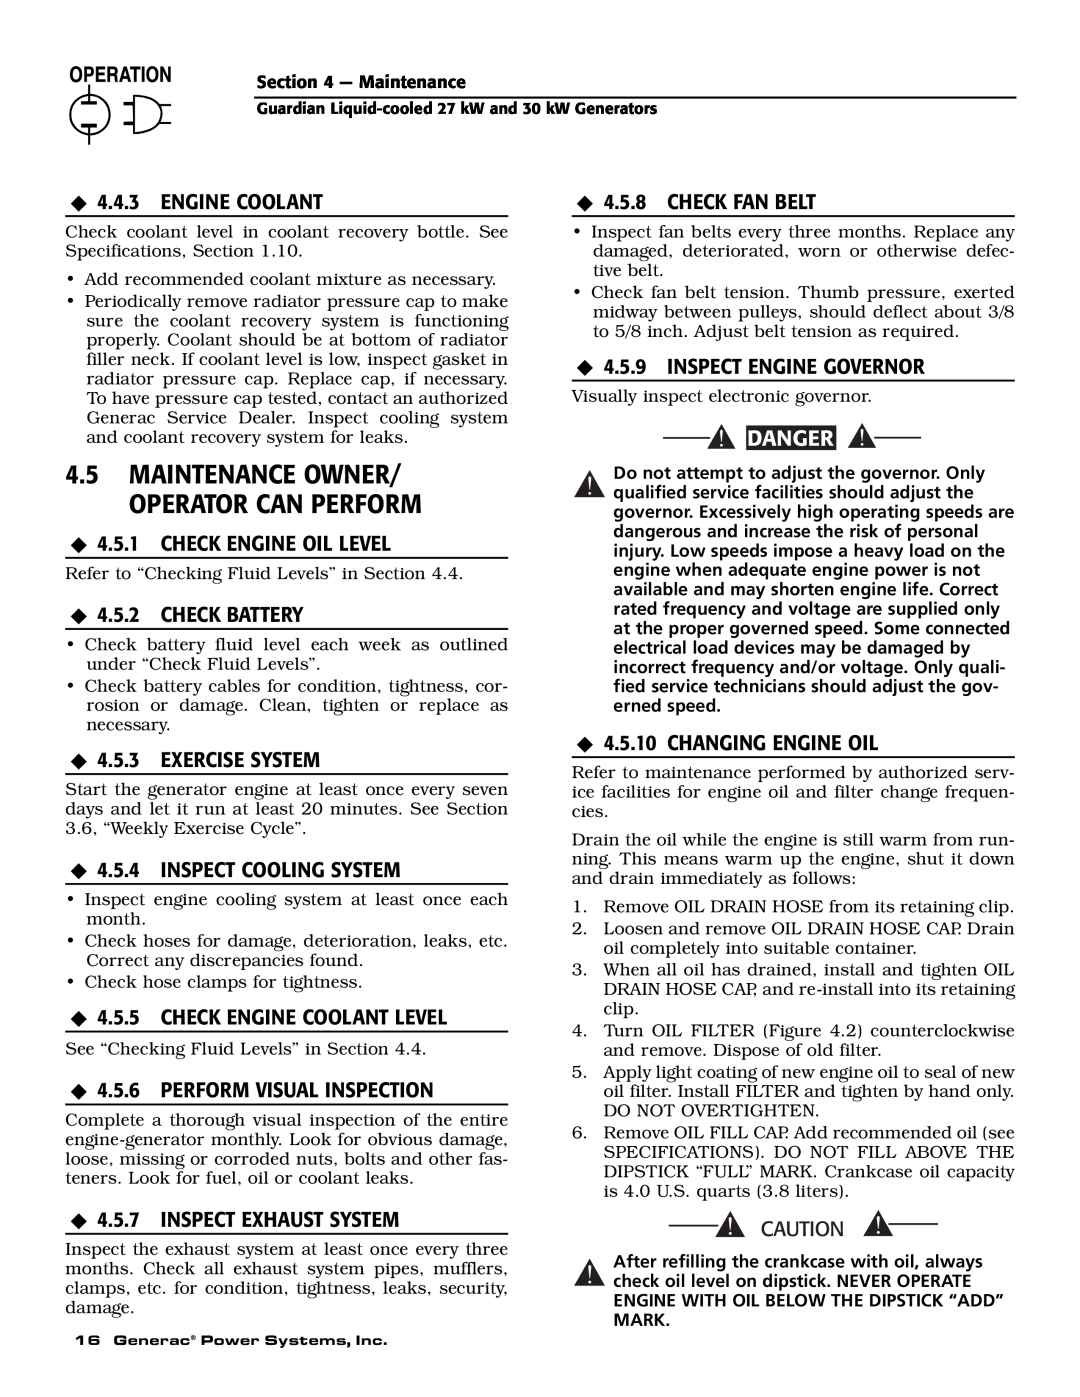 Generac Power Systems 004988-1 owner manual 4.5MAINTENANCE OWNER/ OPERATOR CAN PERFORM, Danger 